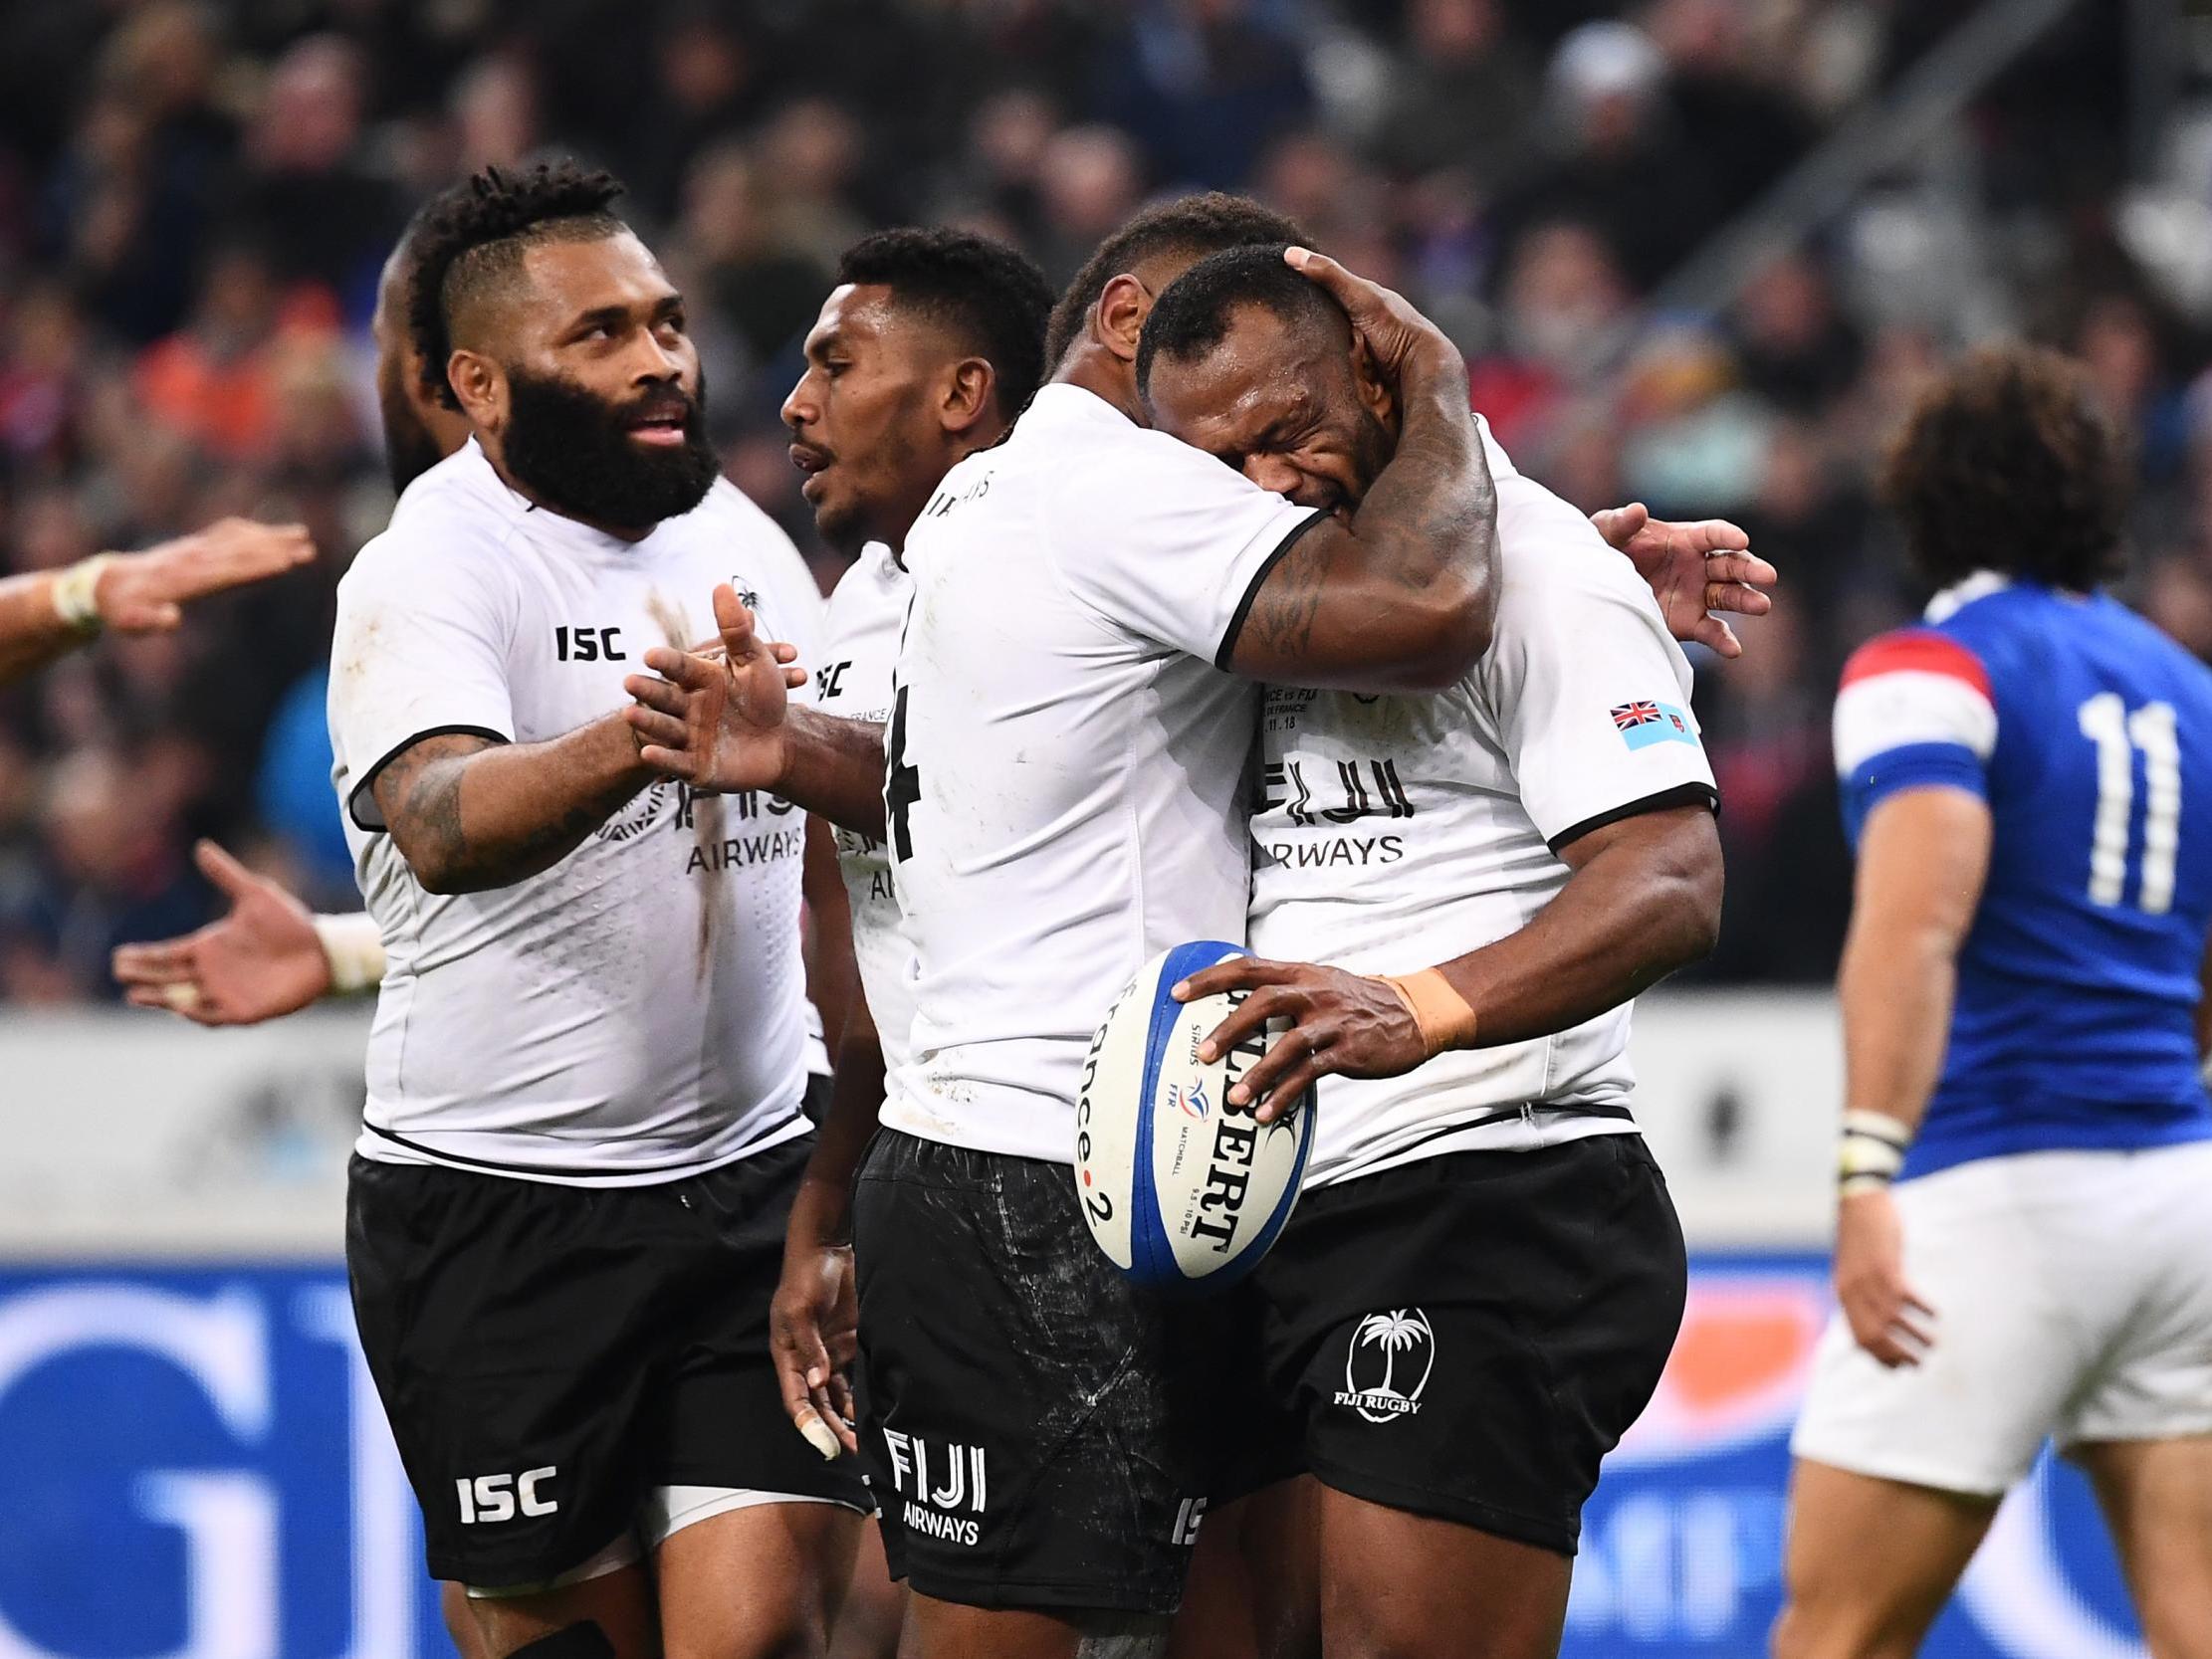 Fiji recorded their first ever win over France last month